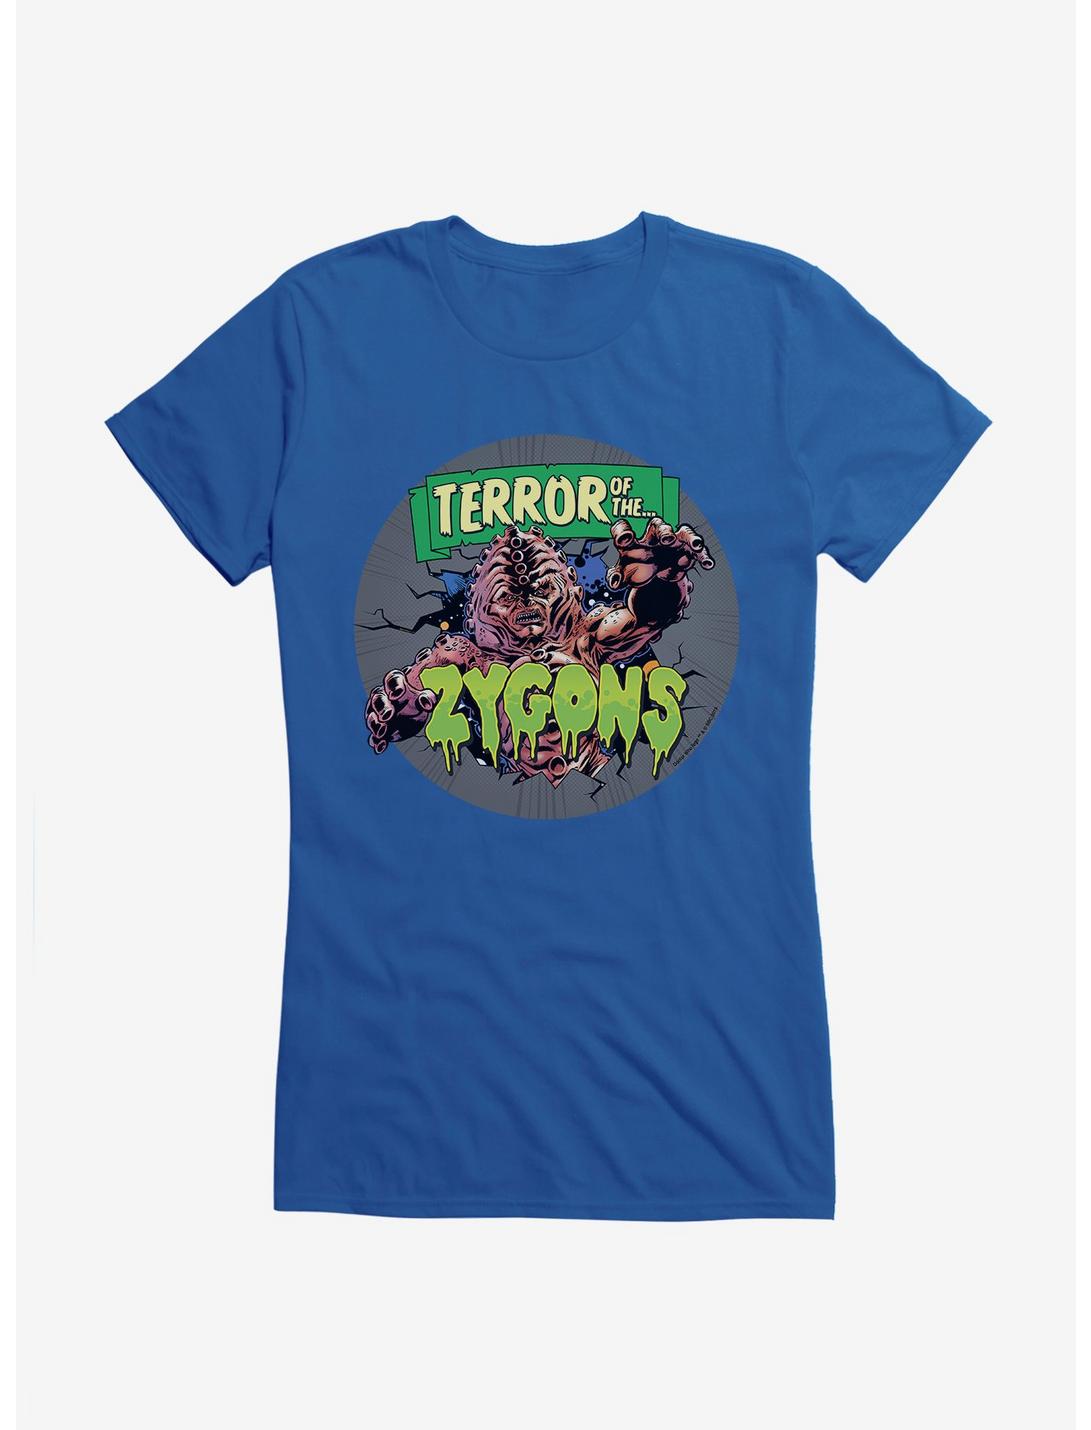 Doctor Who Terror Of The Zygons Girls T-Shirt, , hi-res